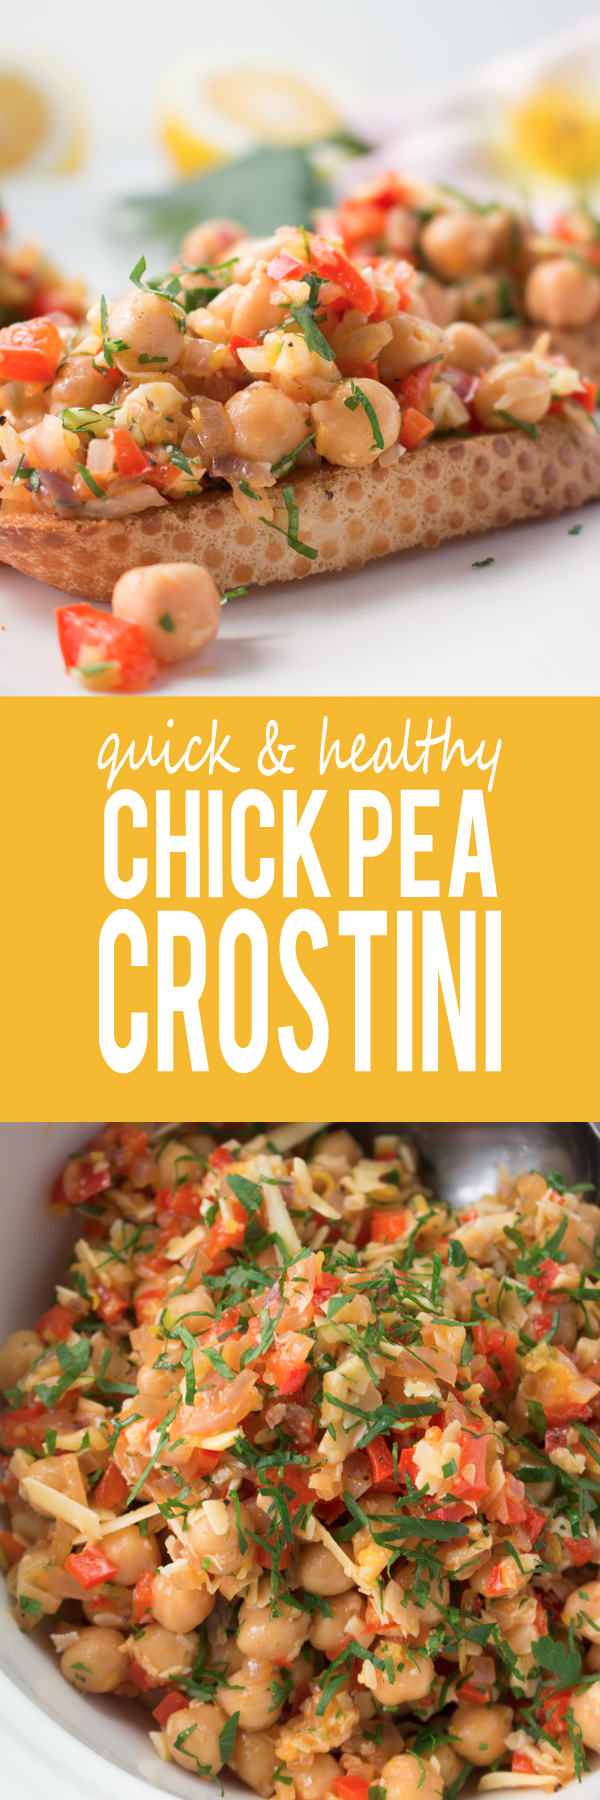 Light, fresh, quick and easy, these chick pea crostini’s will make a great appetizer option for any type of gathering. TRY THESE OMG!!